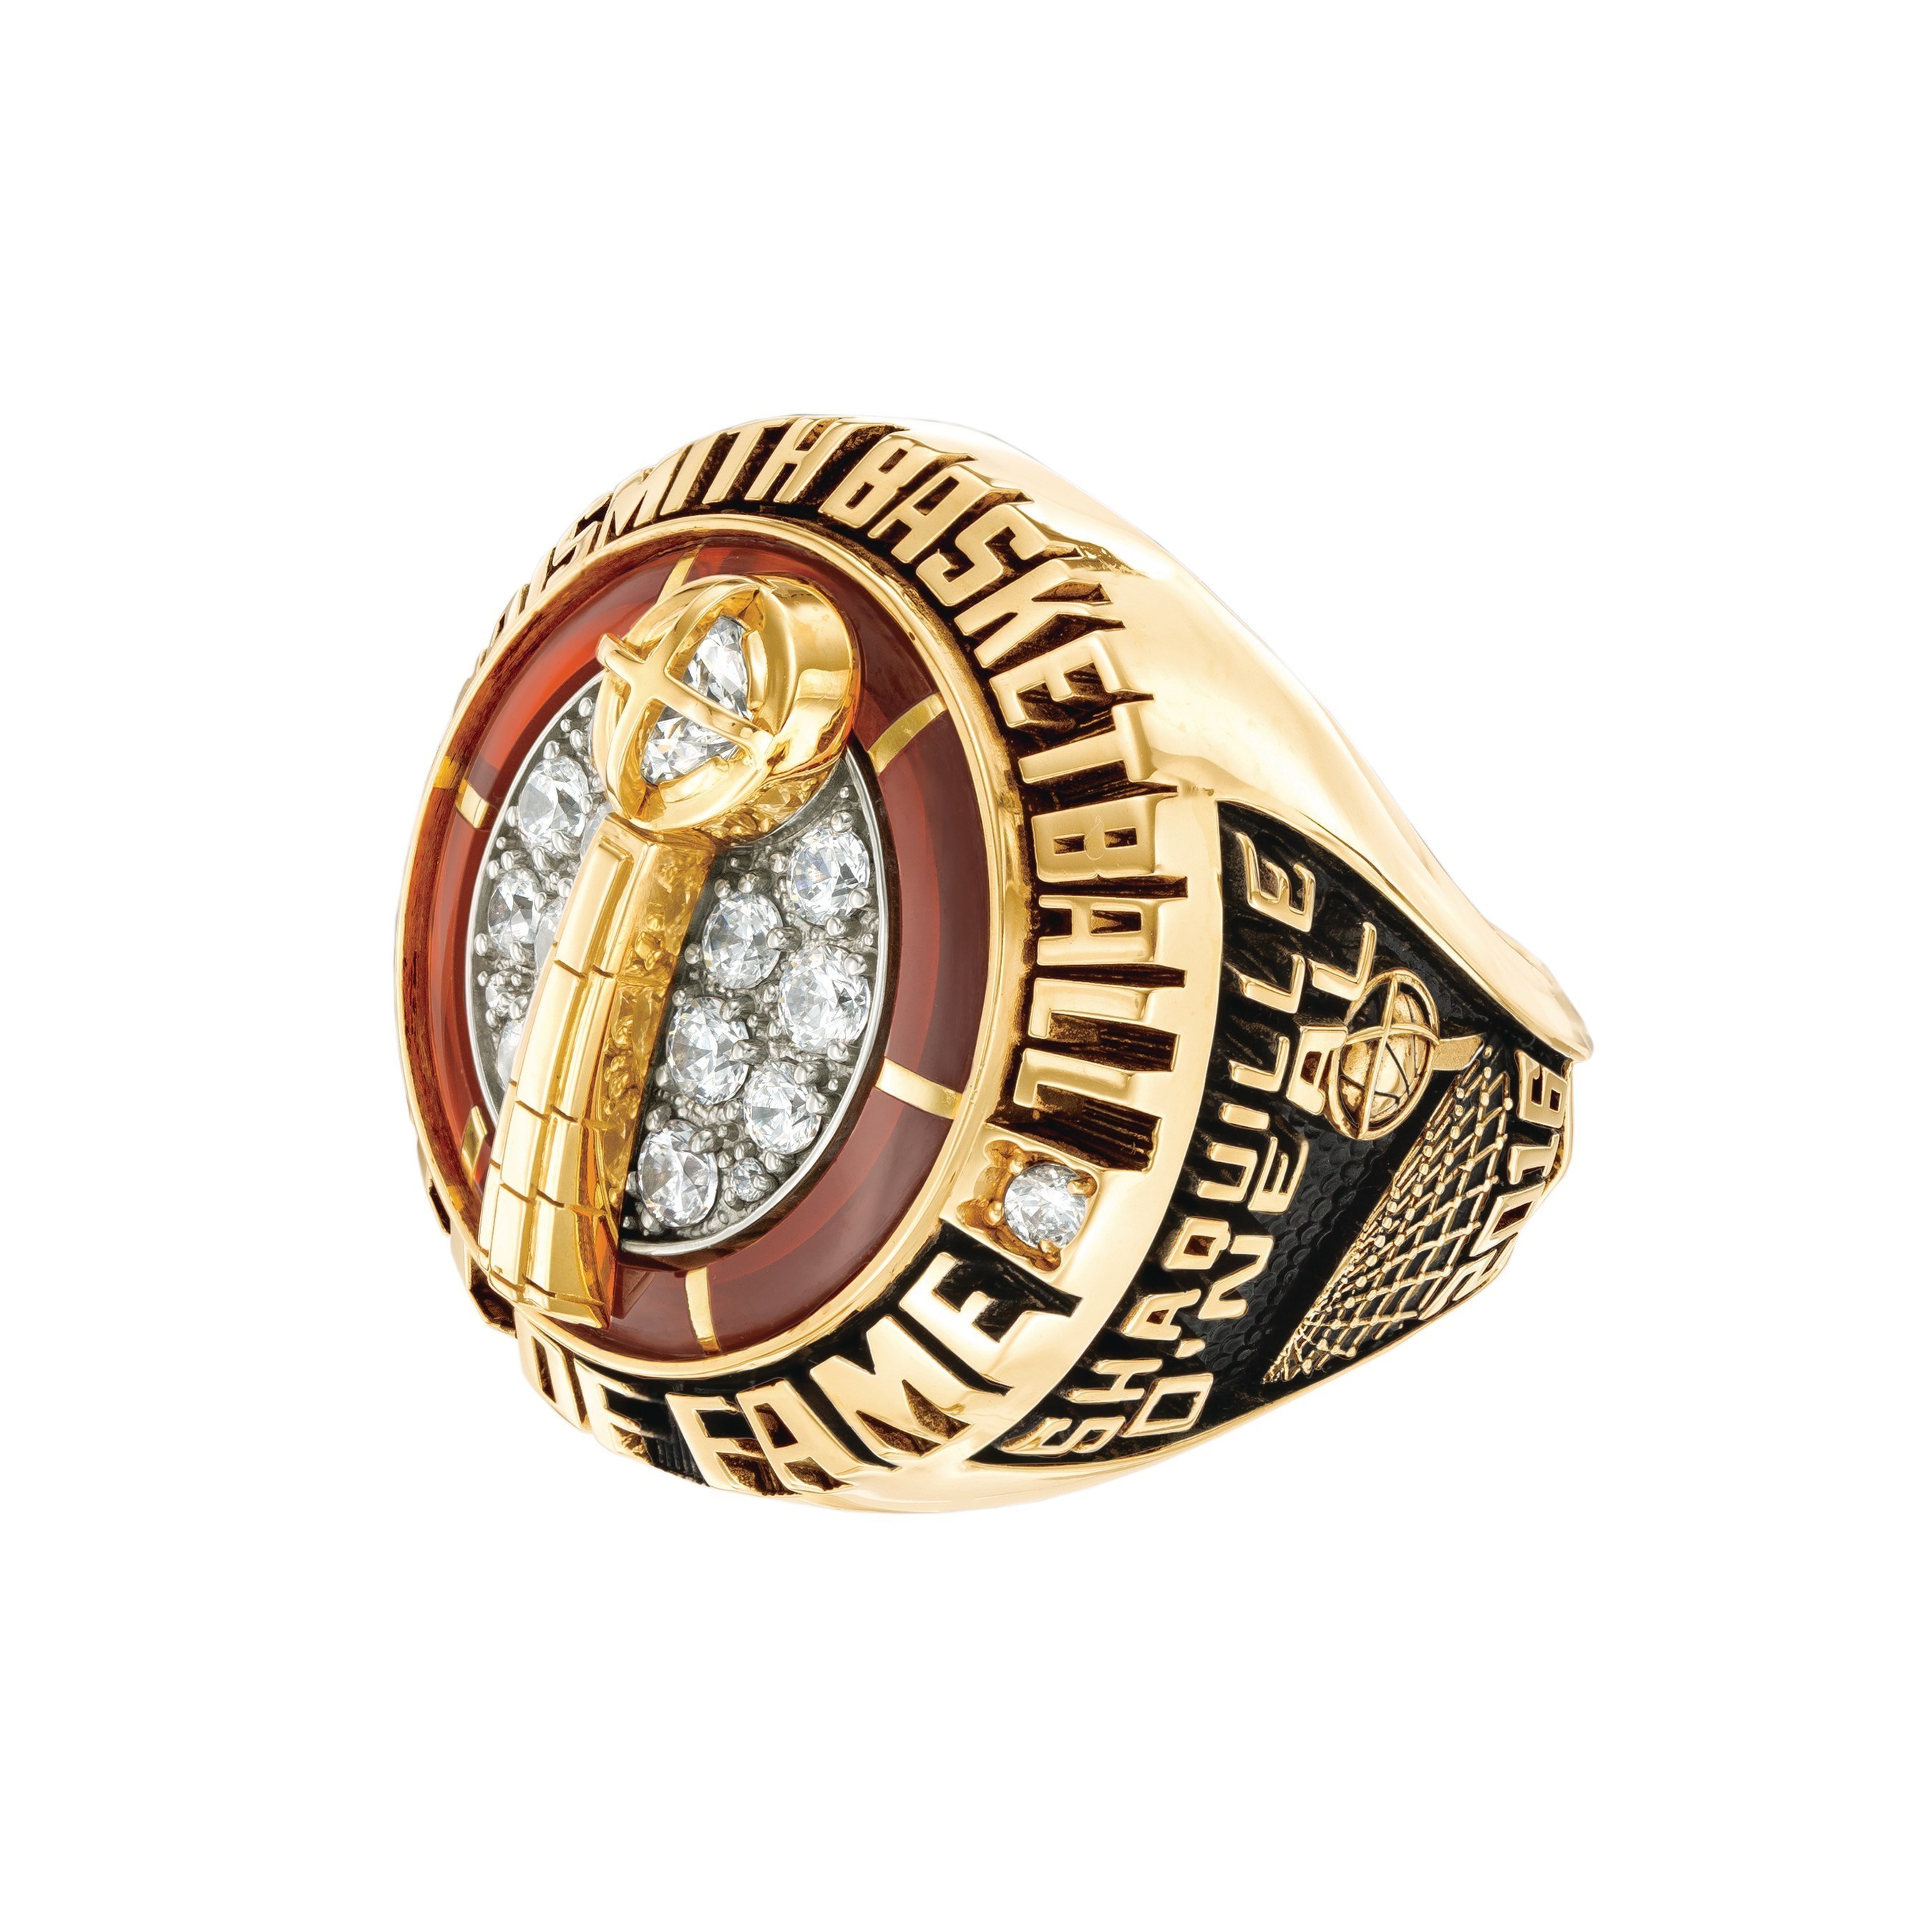 Zales Presents the New Naismith Memorial Basketball Hall of Fame Ring to the Class of 2016